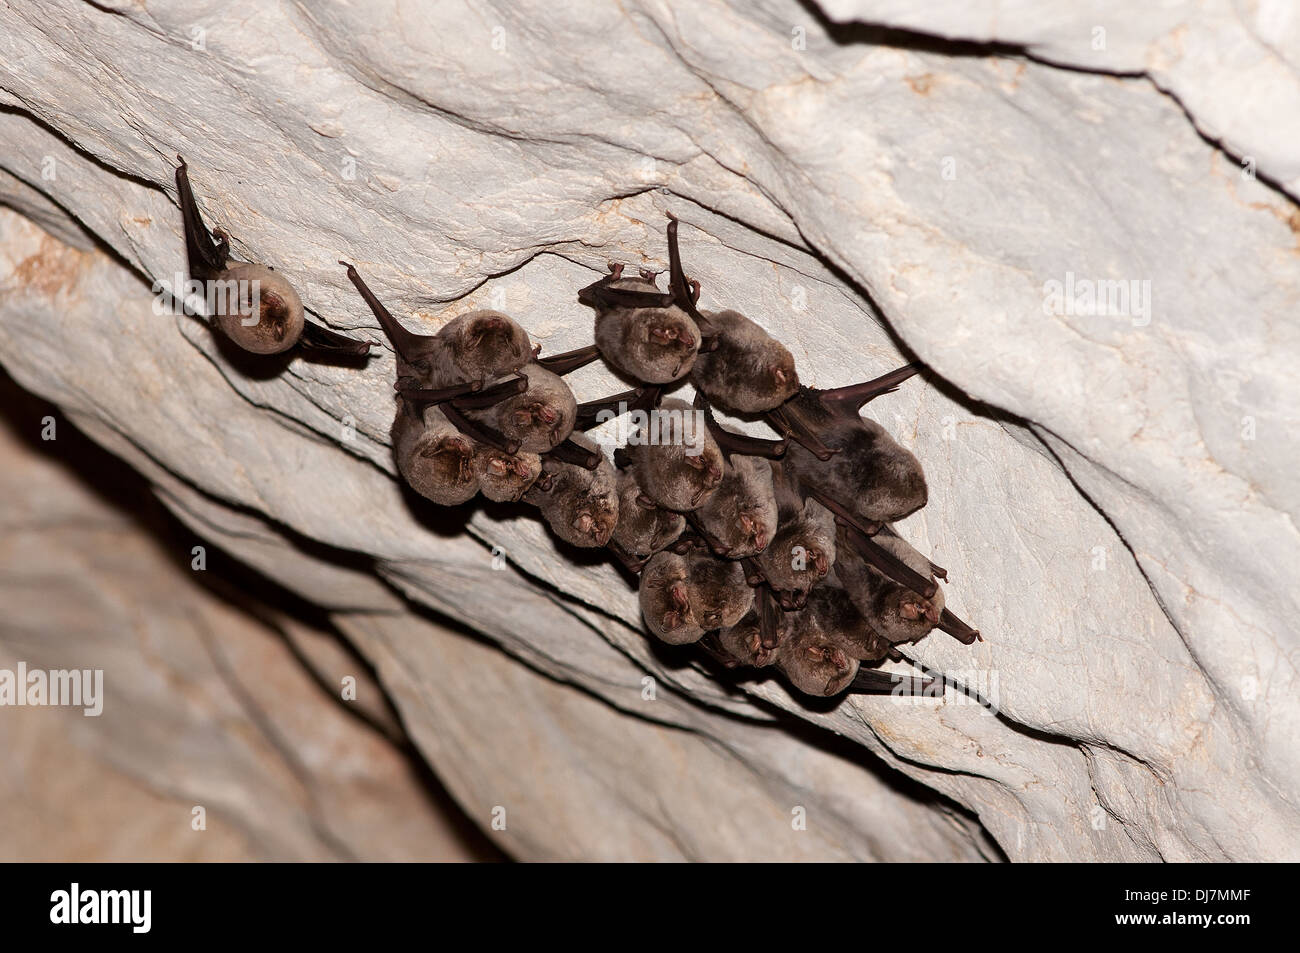 Horizontal portrait of group of Schreibers' bat, Miniopterus schreibersii, hanging from the ceiling of a cave. Stock Photo